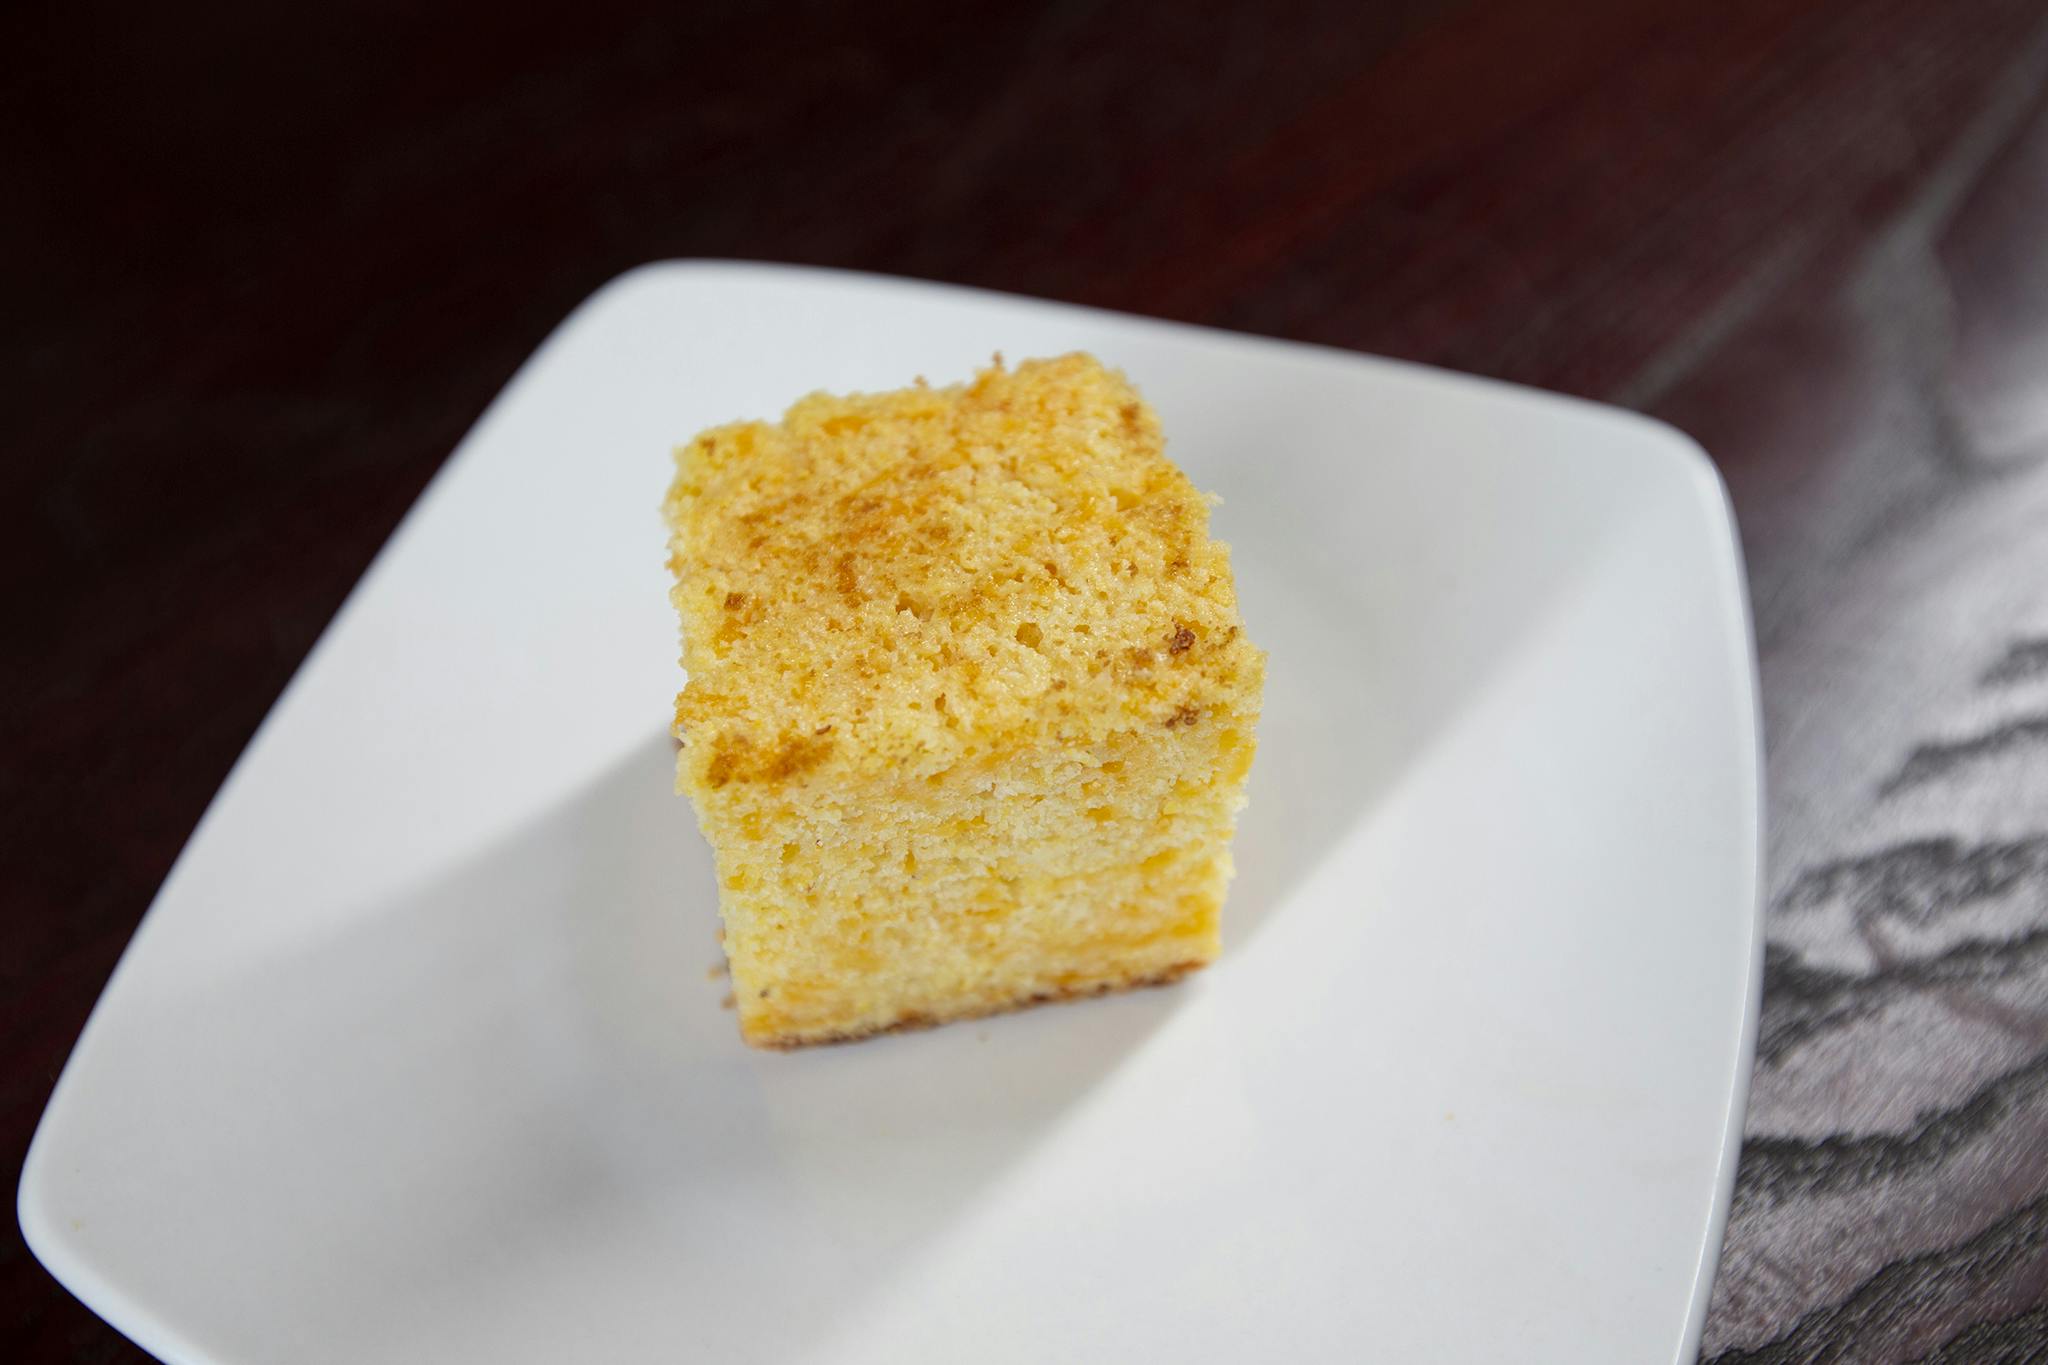 Cornbread from Firehouse Grill - Chicago Ave in Evanston, IL